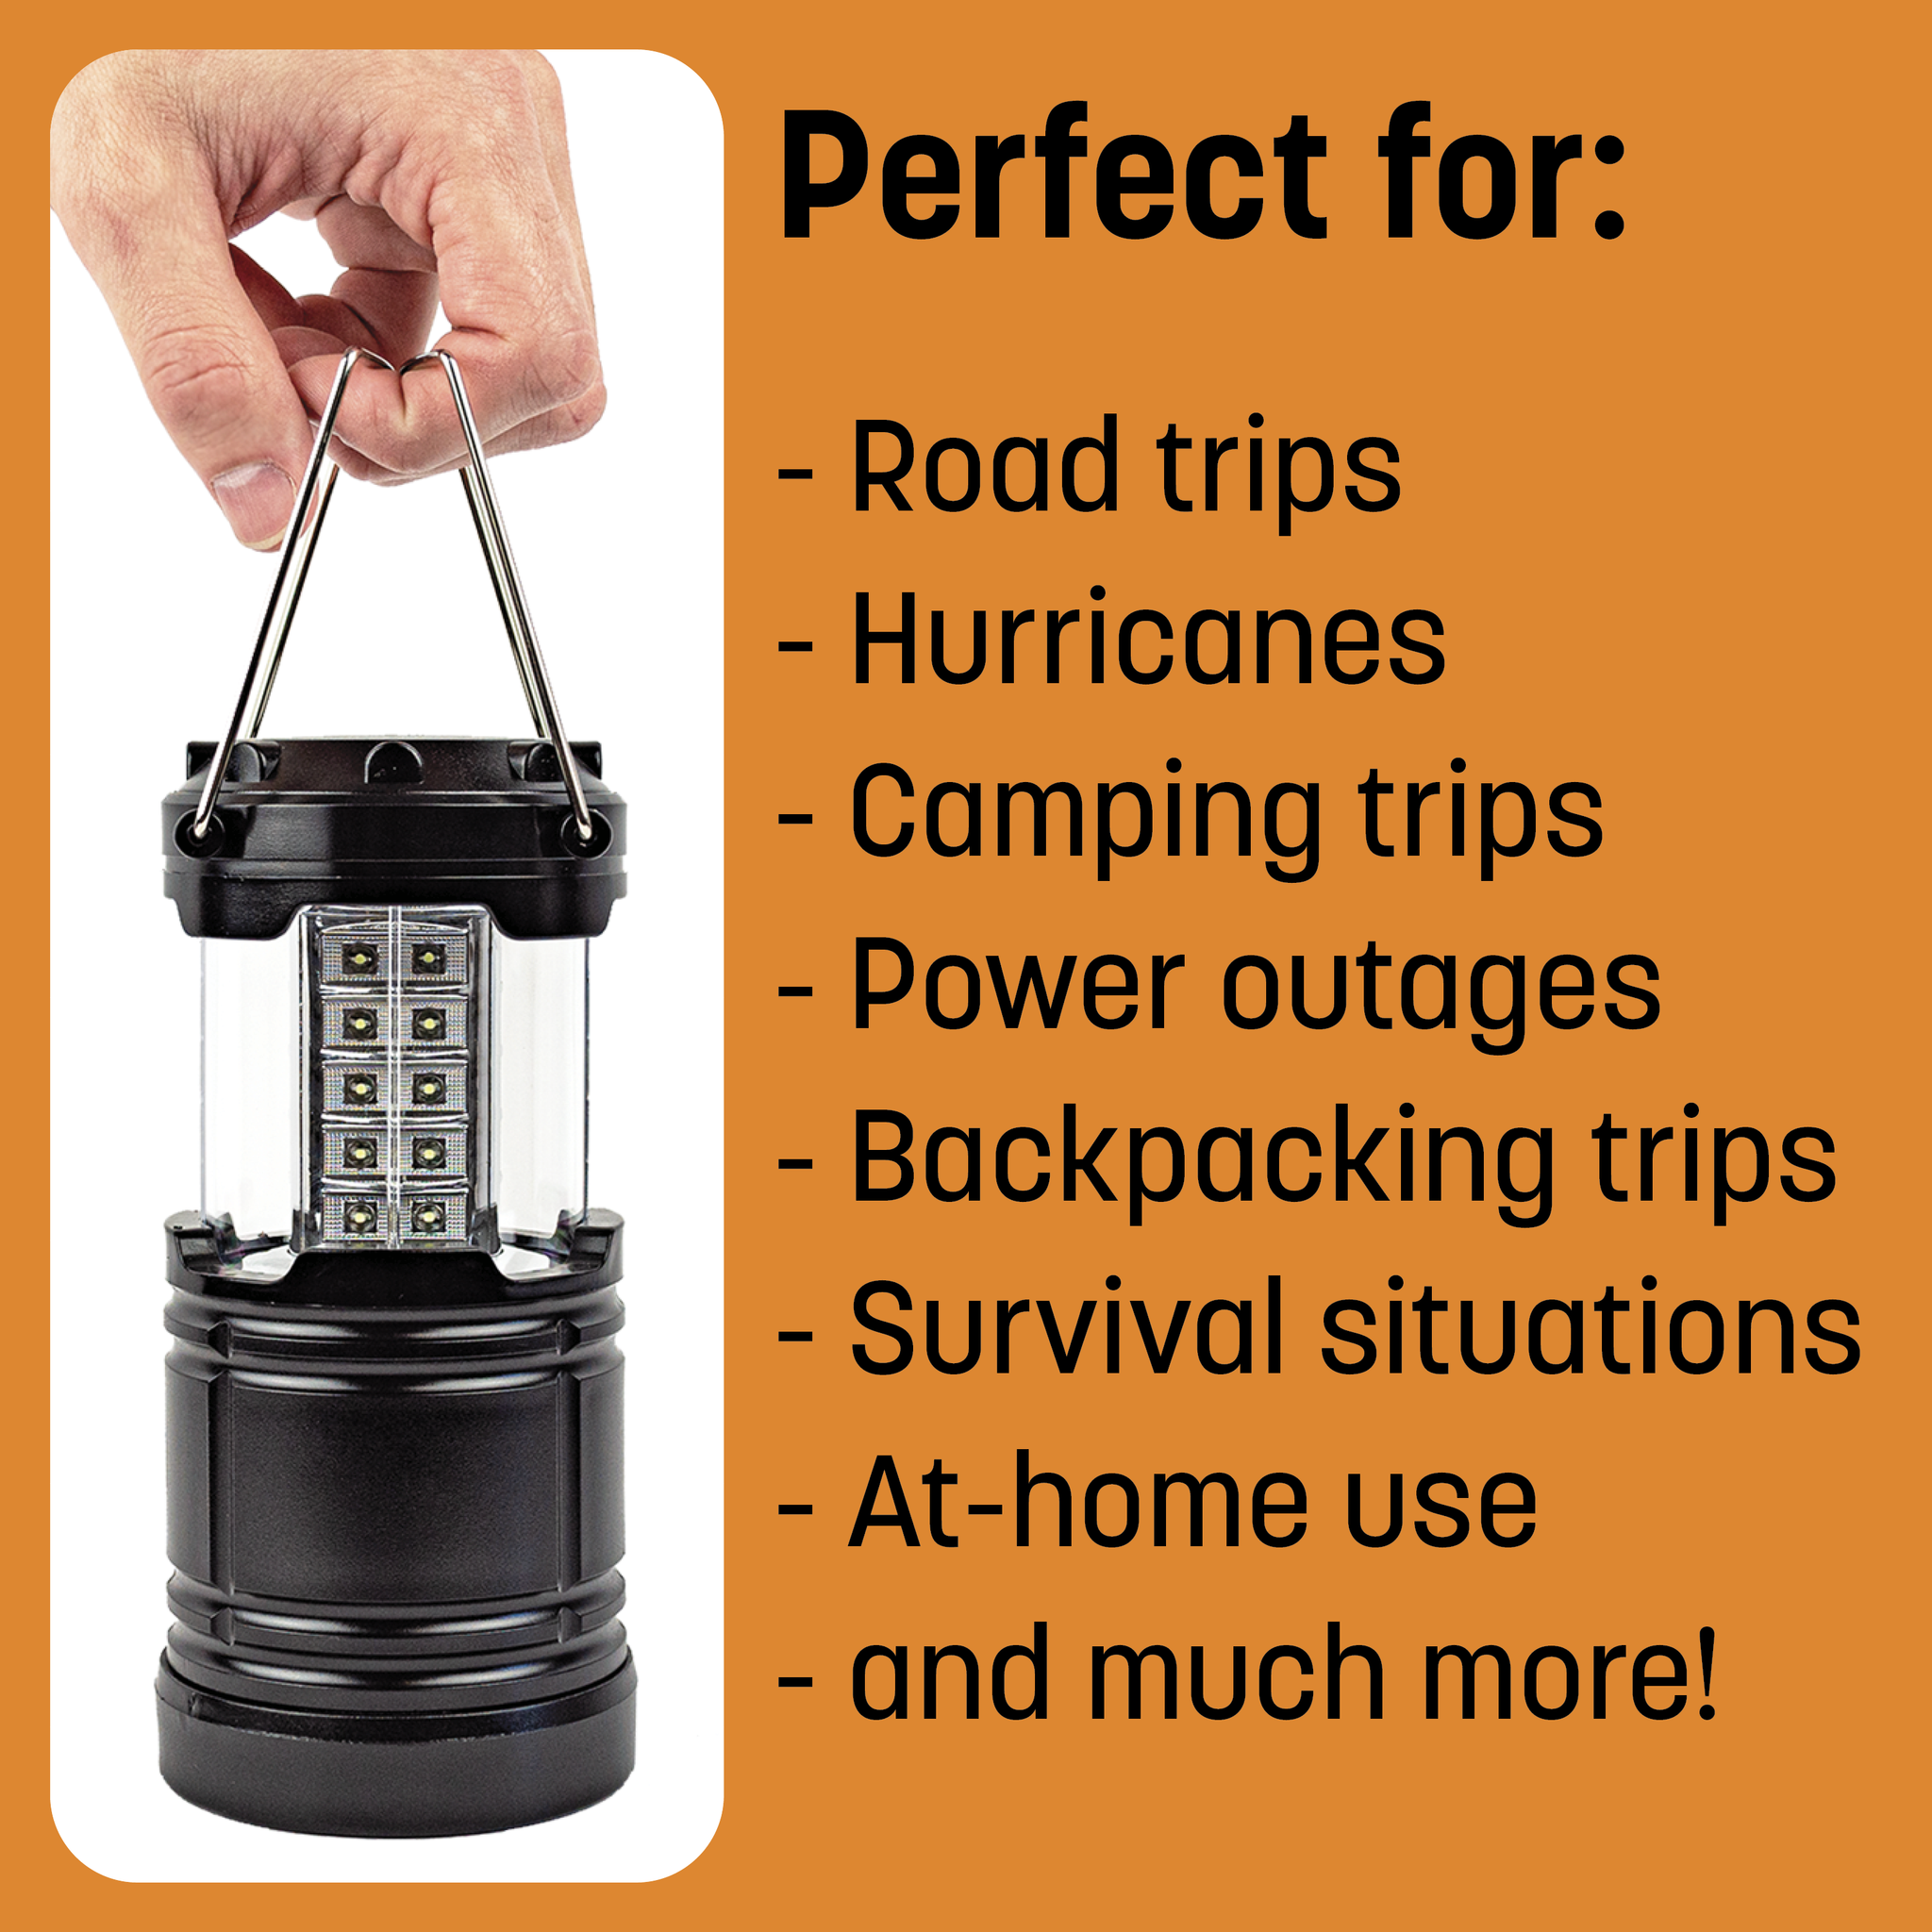 Portal 2 Portal Camping Lantern Rechargeable, Portable LED Flashlight  Lantern, Camping Light for Power Outages, Emergency, Outdoor Hikin